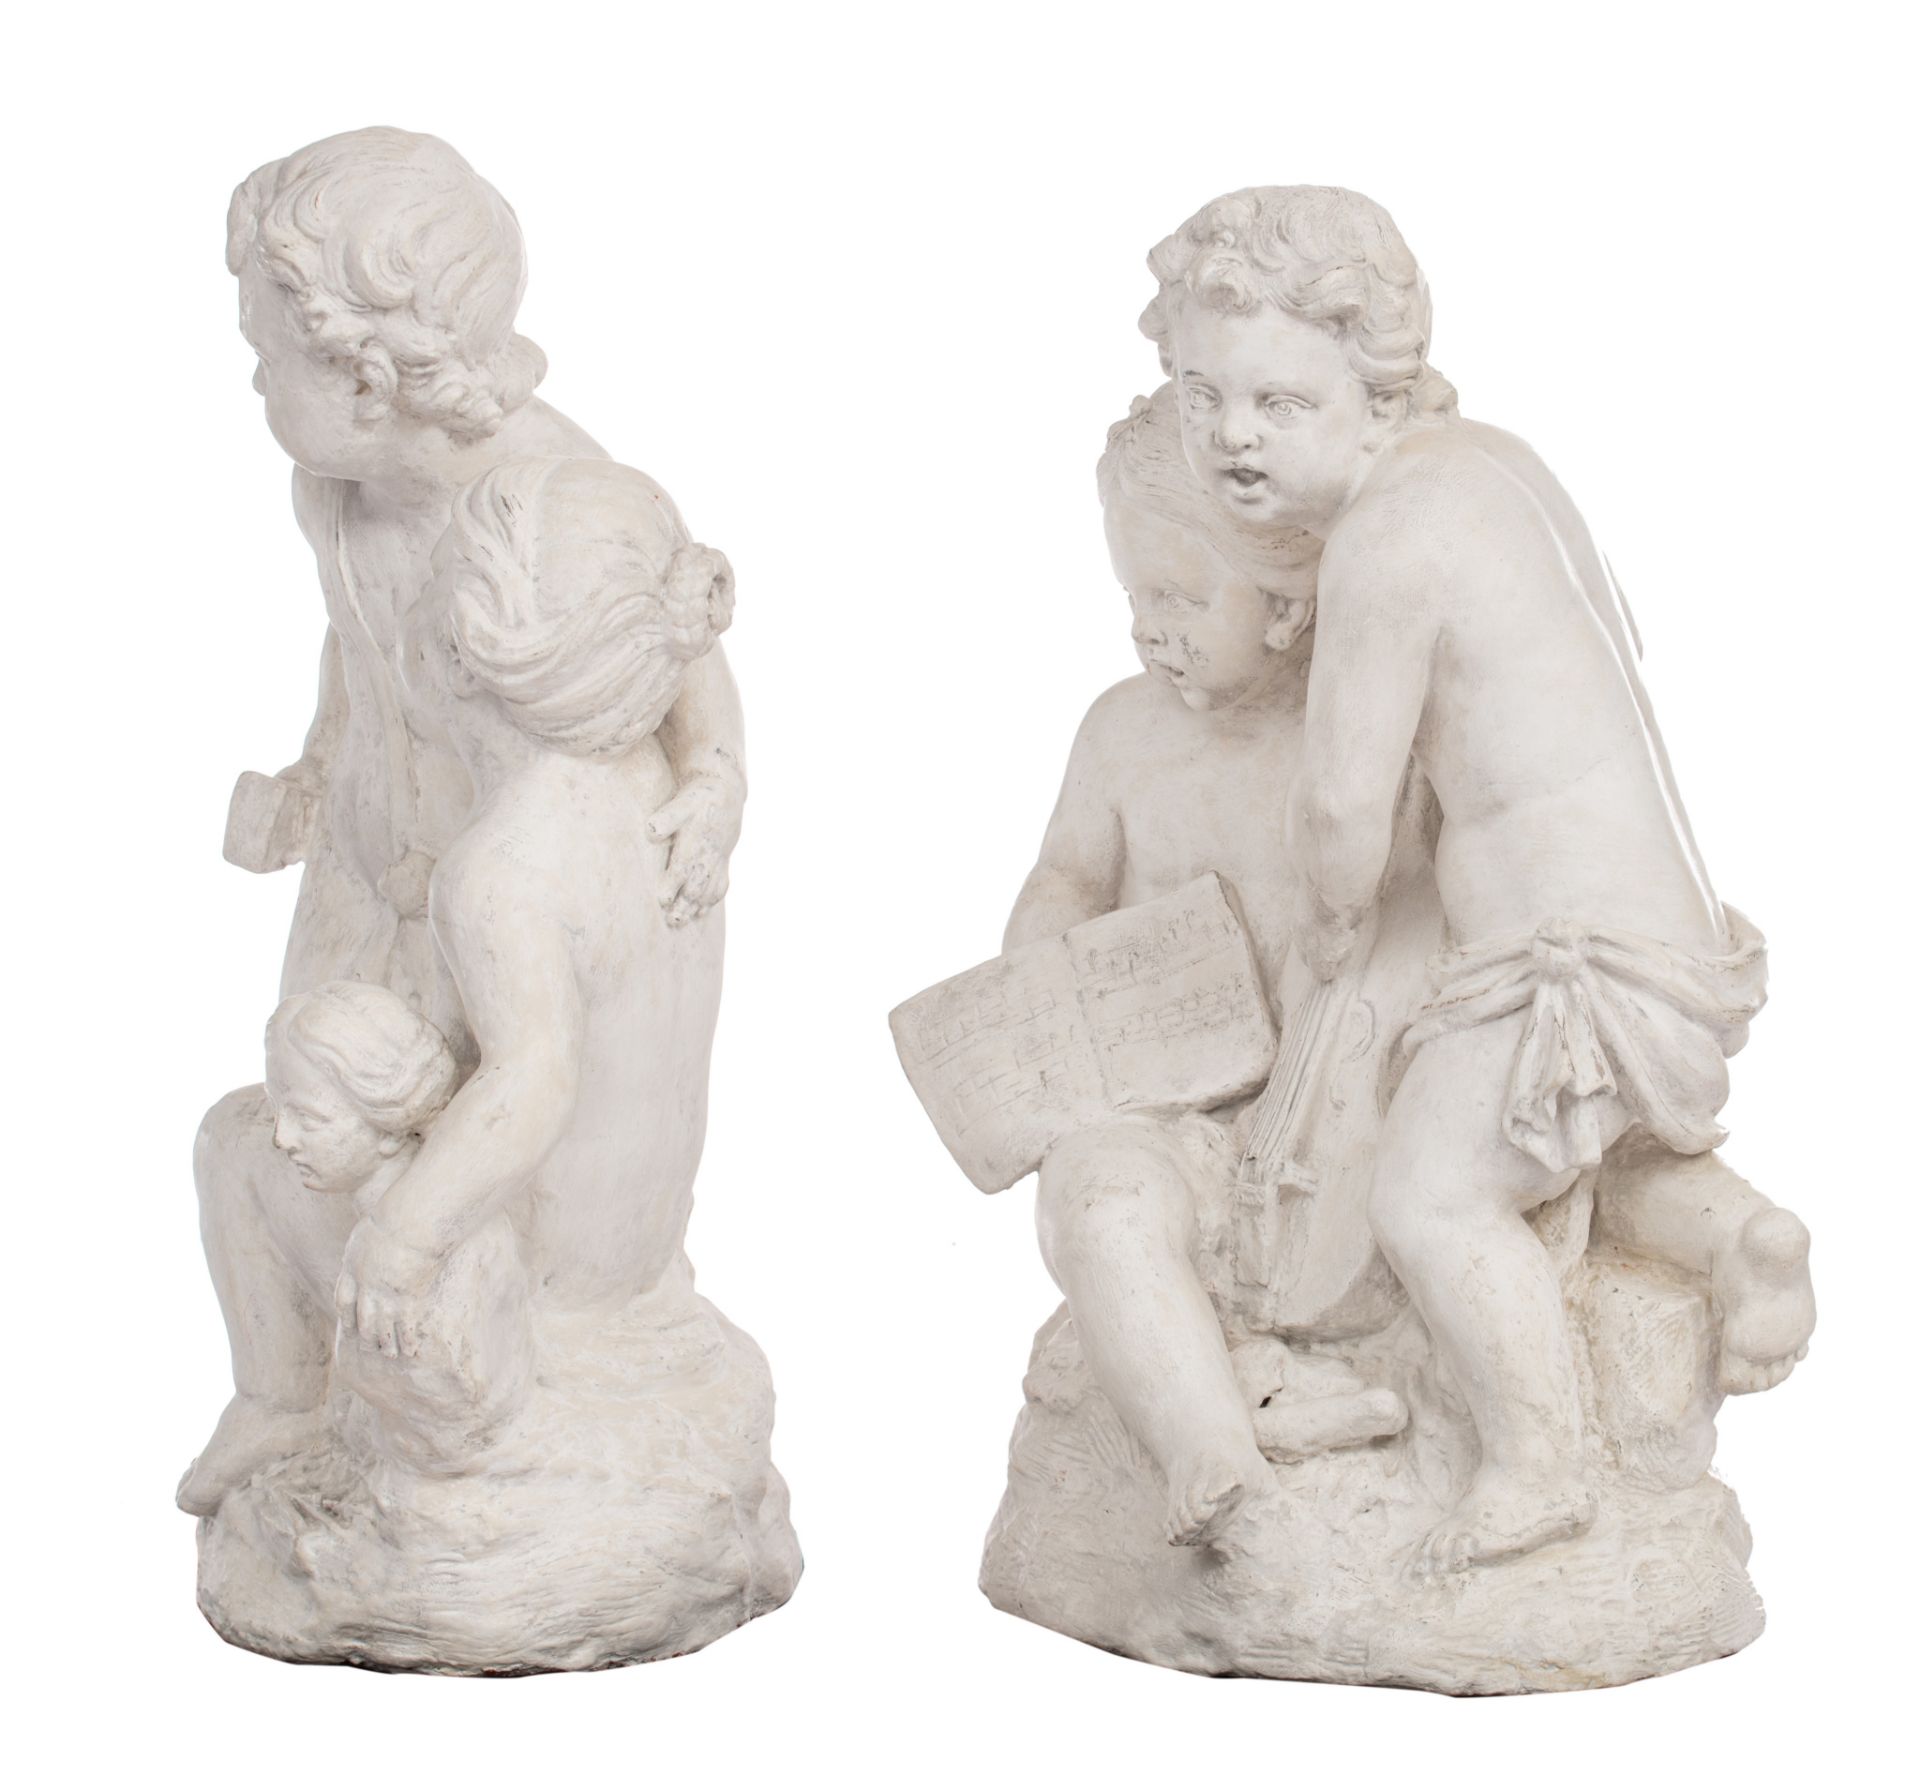 Two white painted terracotta sculptures, depicting an allegory on music and sculpture, 18thC, H 85 - - Image 4 of 11